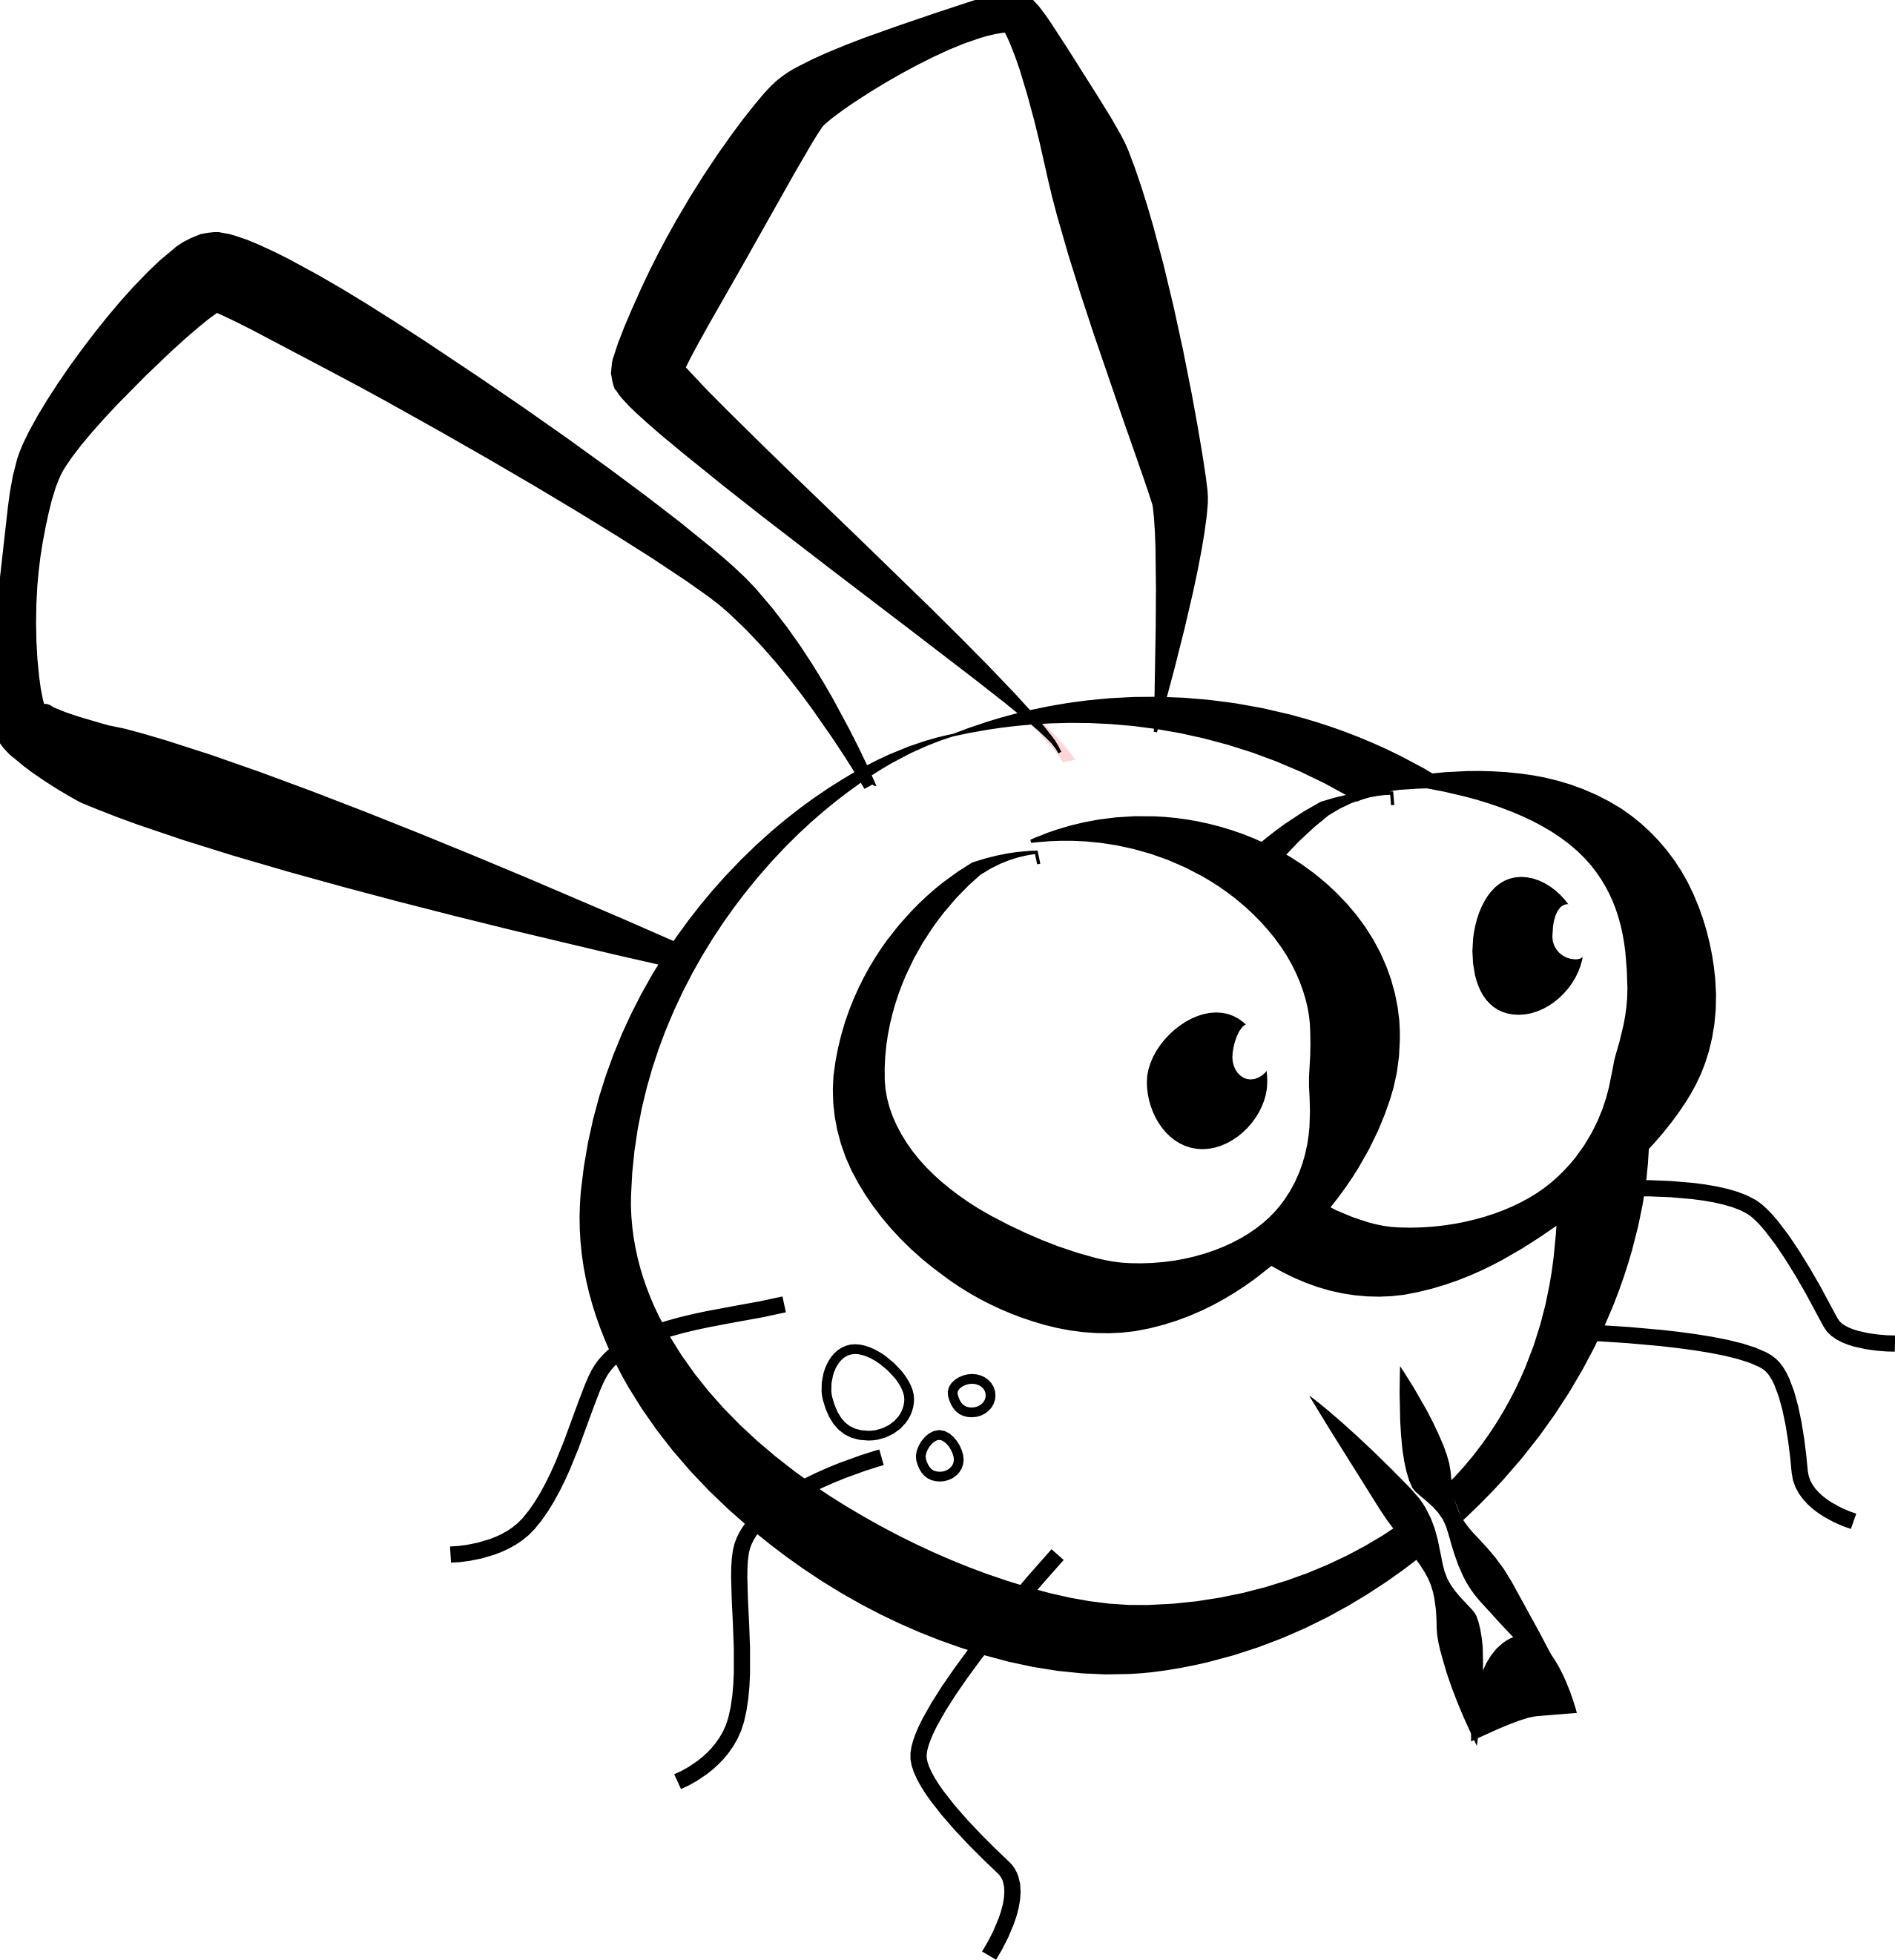 cartoon fly black white line art drawing scalable vector graphics ...